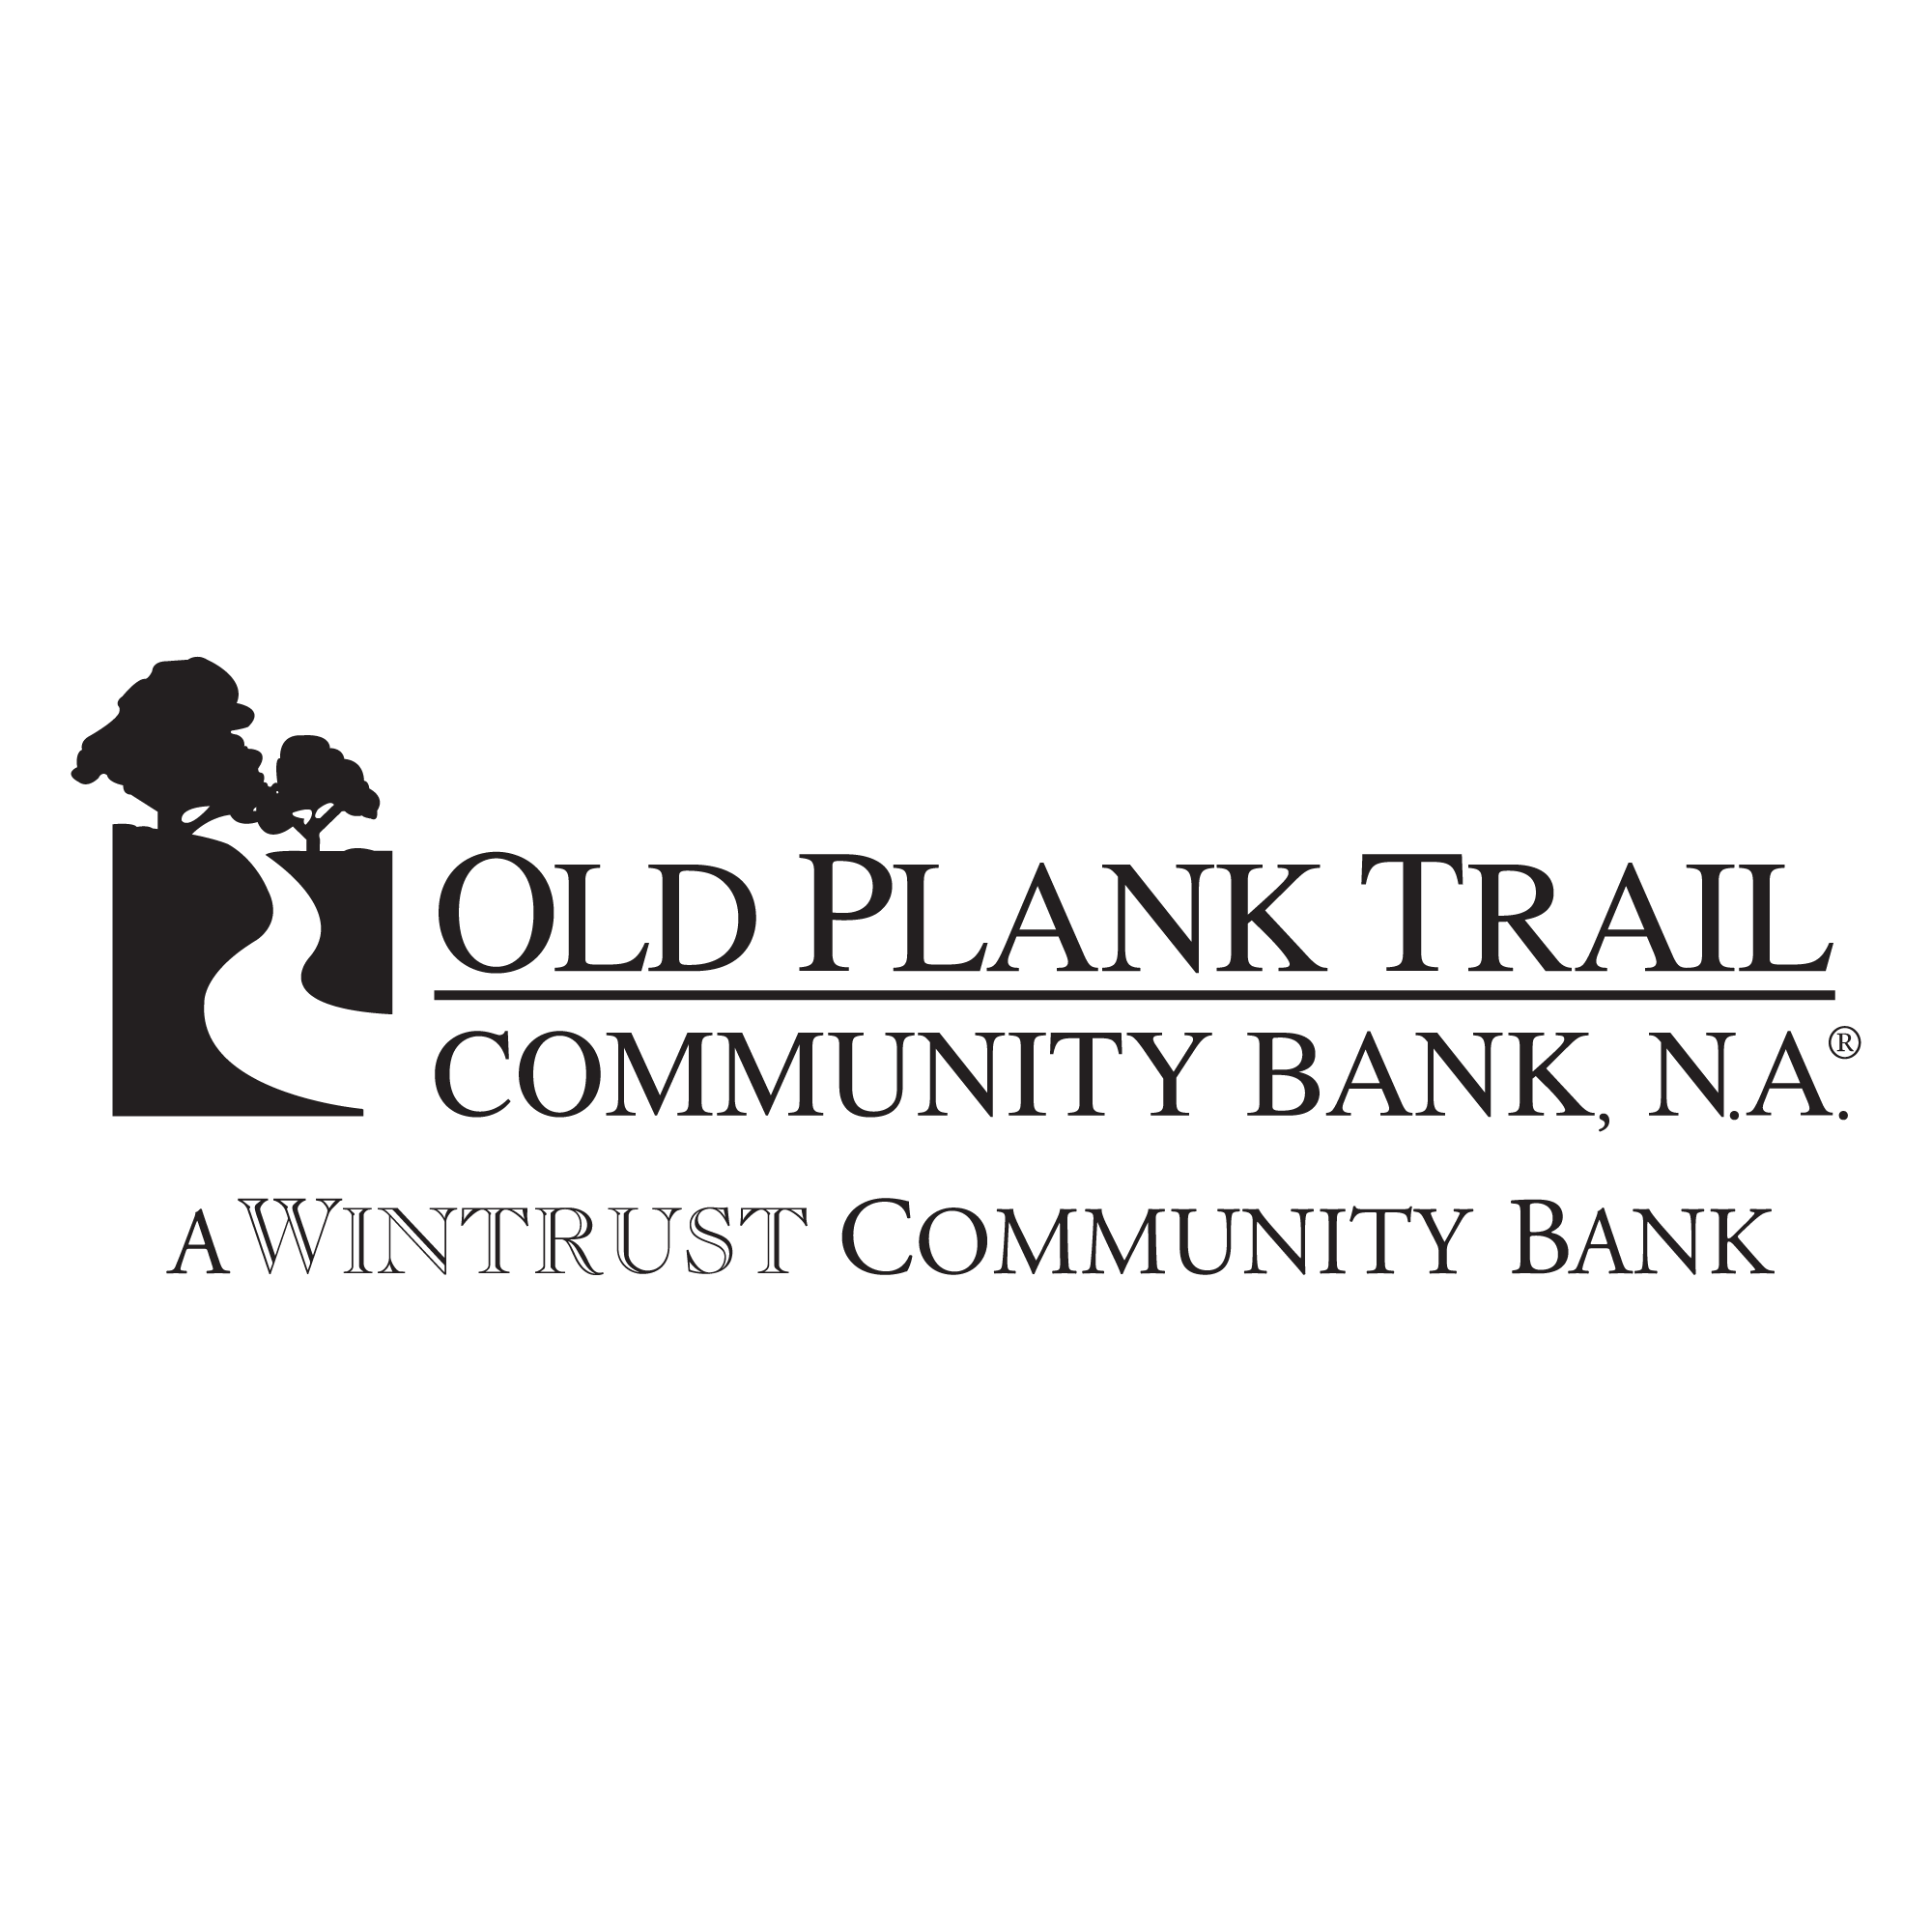 Old Plank Trail Community Bank